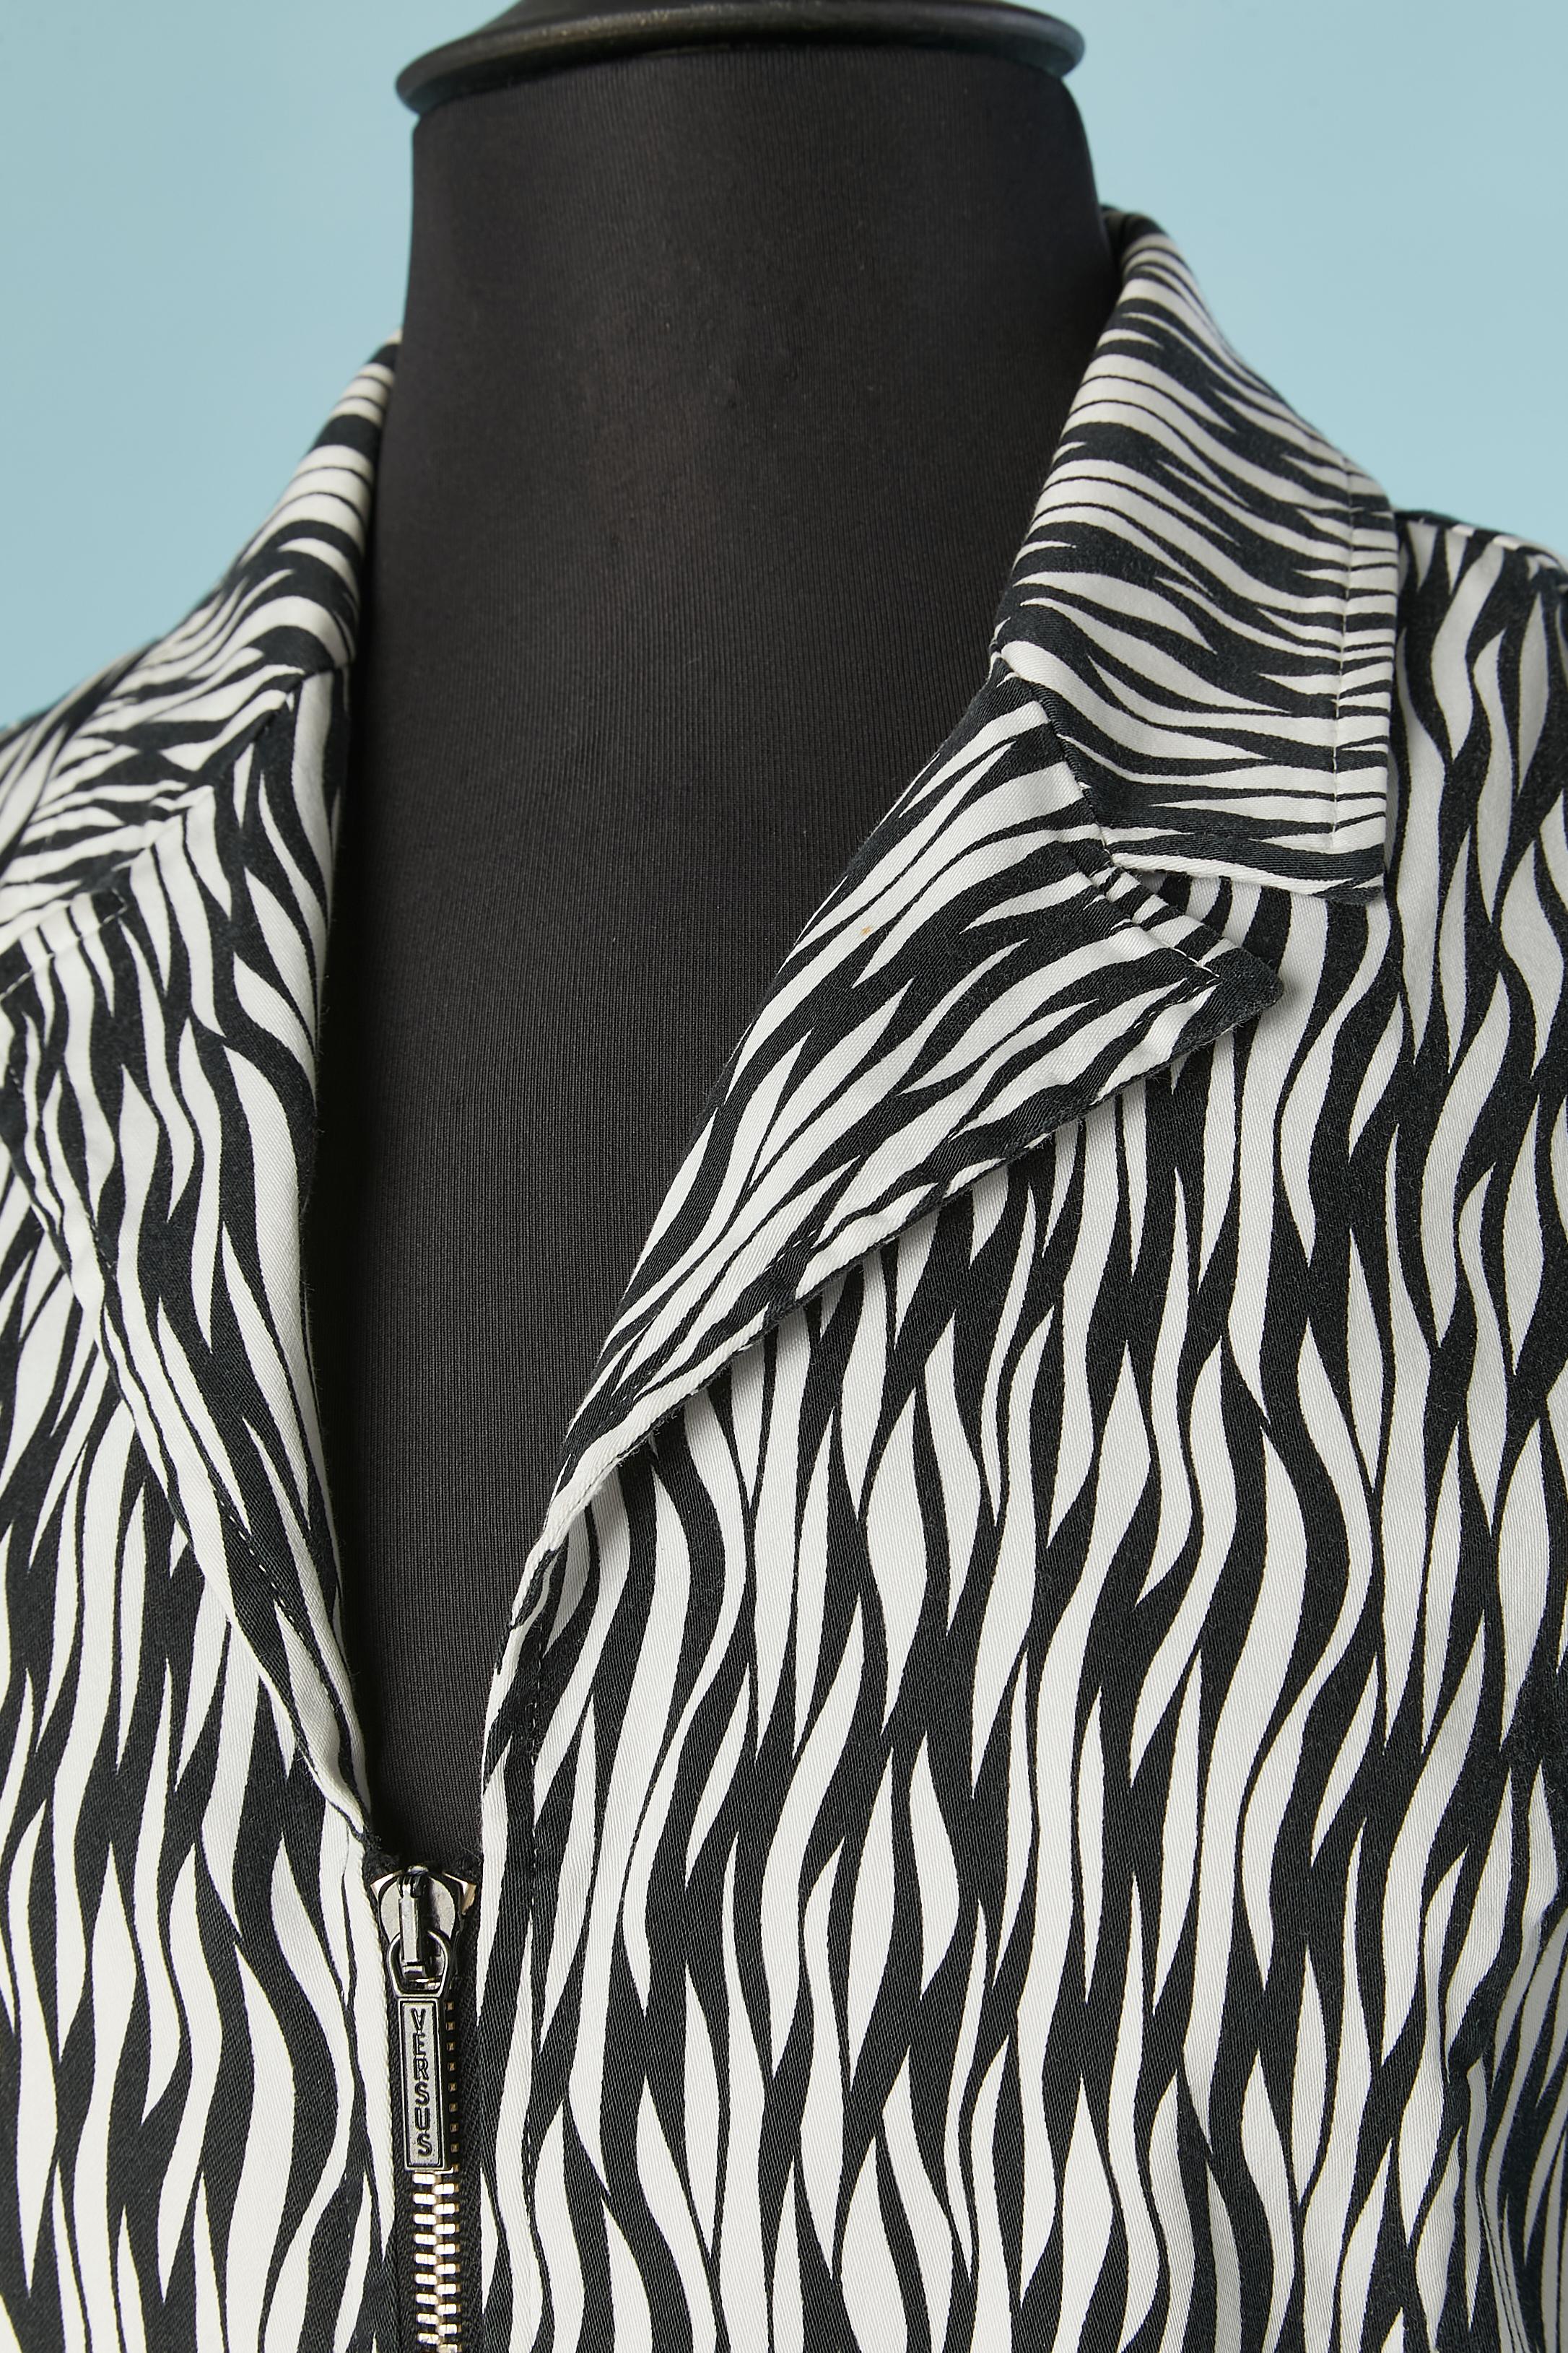 Zebra printed jacket with middle front  zip closure. Main fabric composition: 98% cotton, 2% stretch 
SIZE 44 IT / 40 FR/ 8 US 
